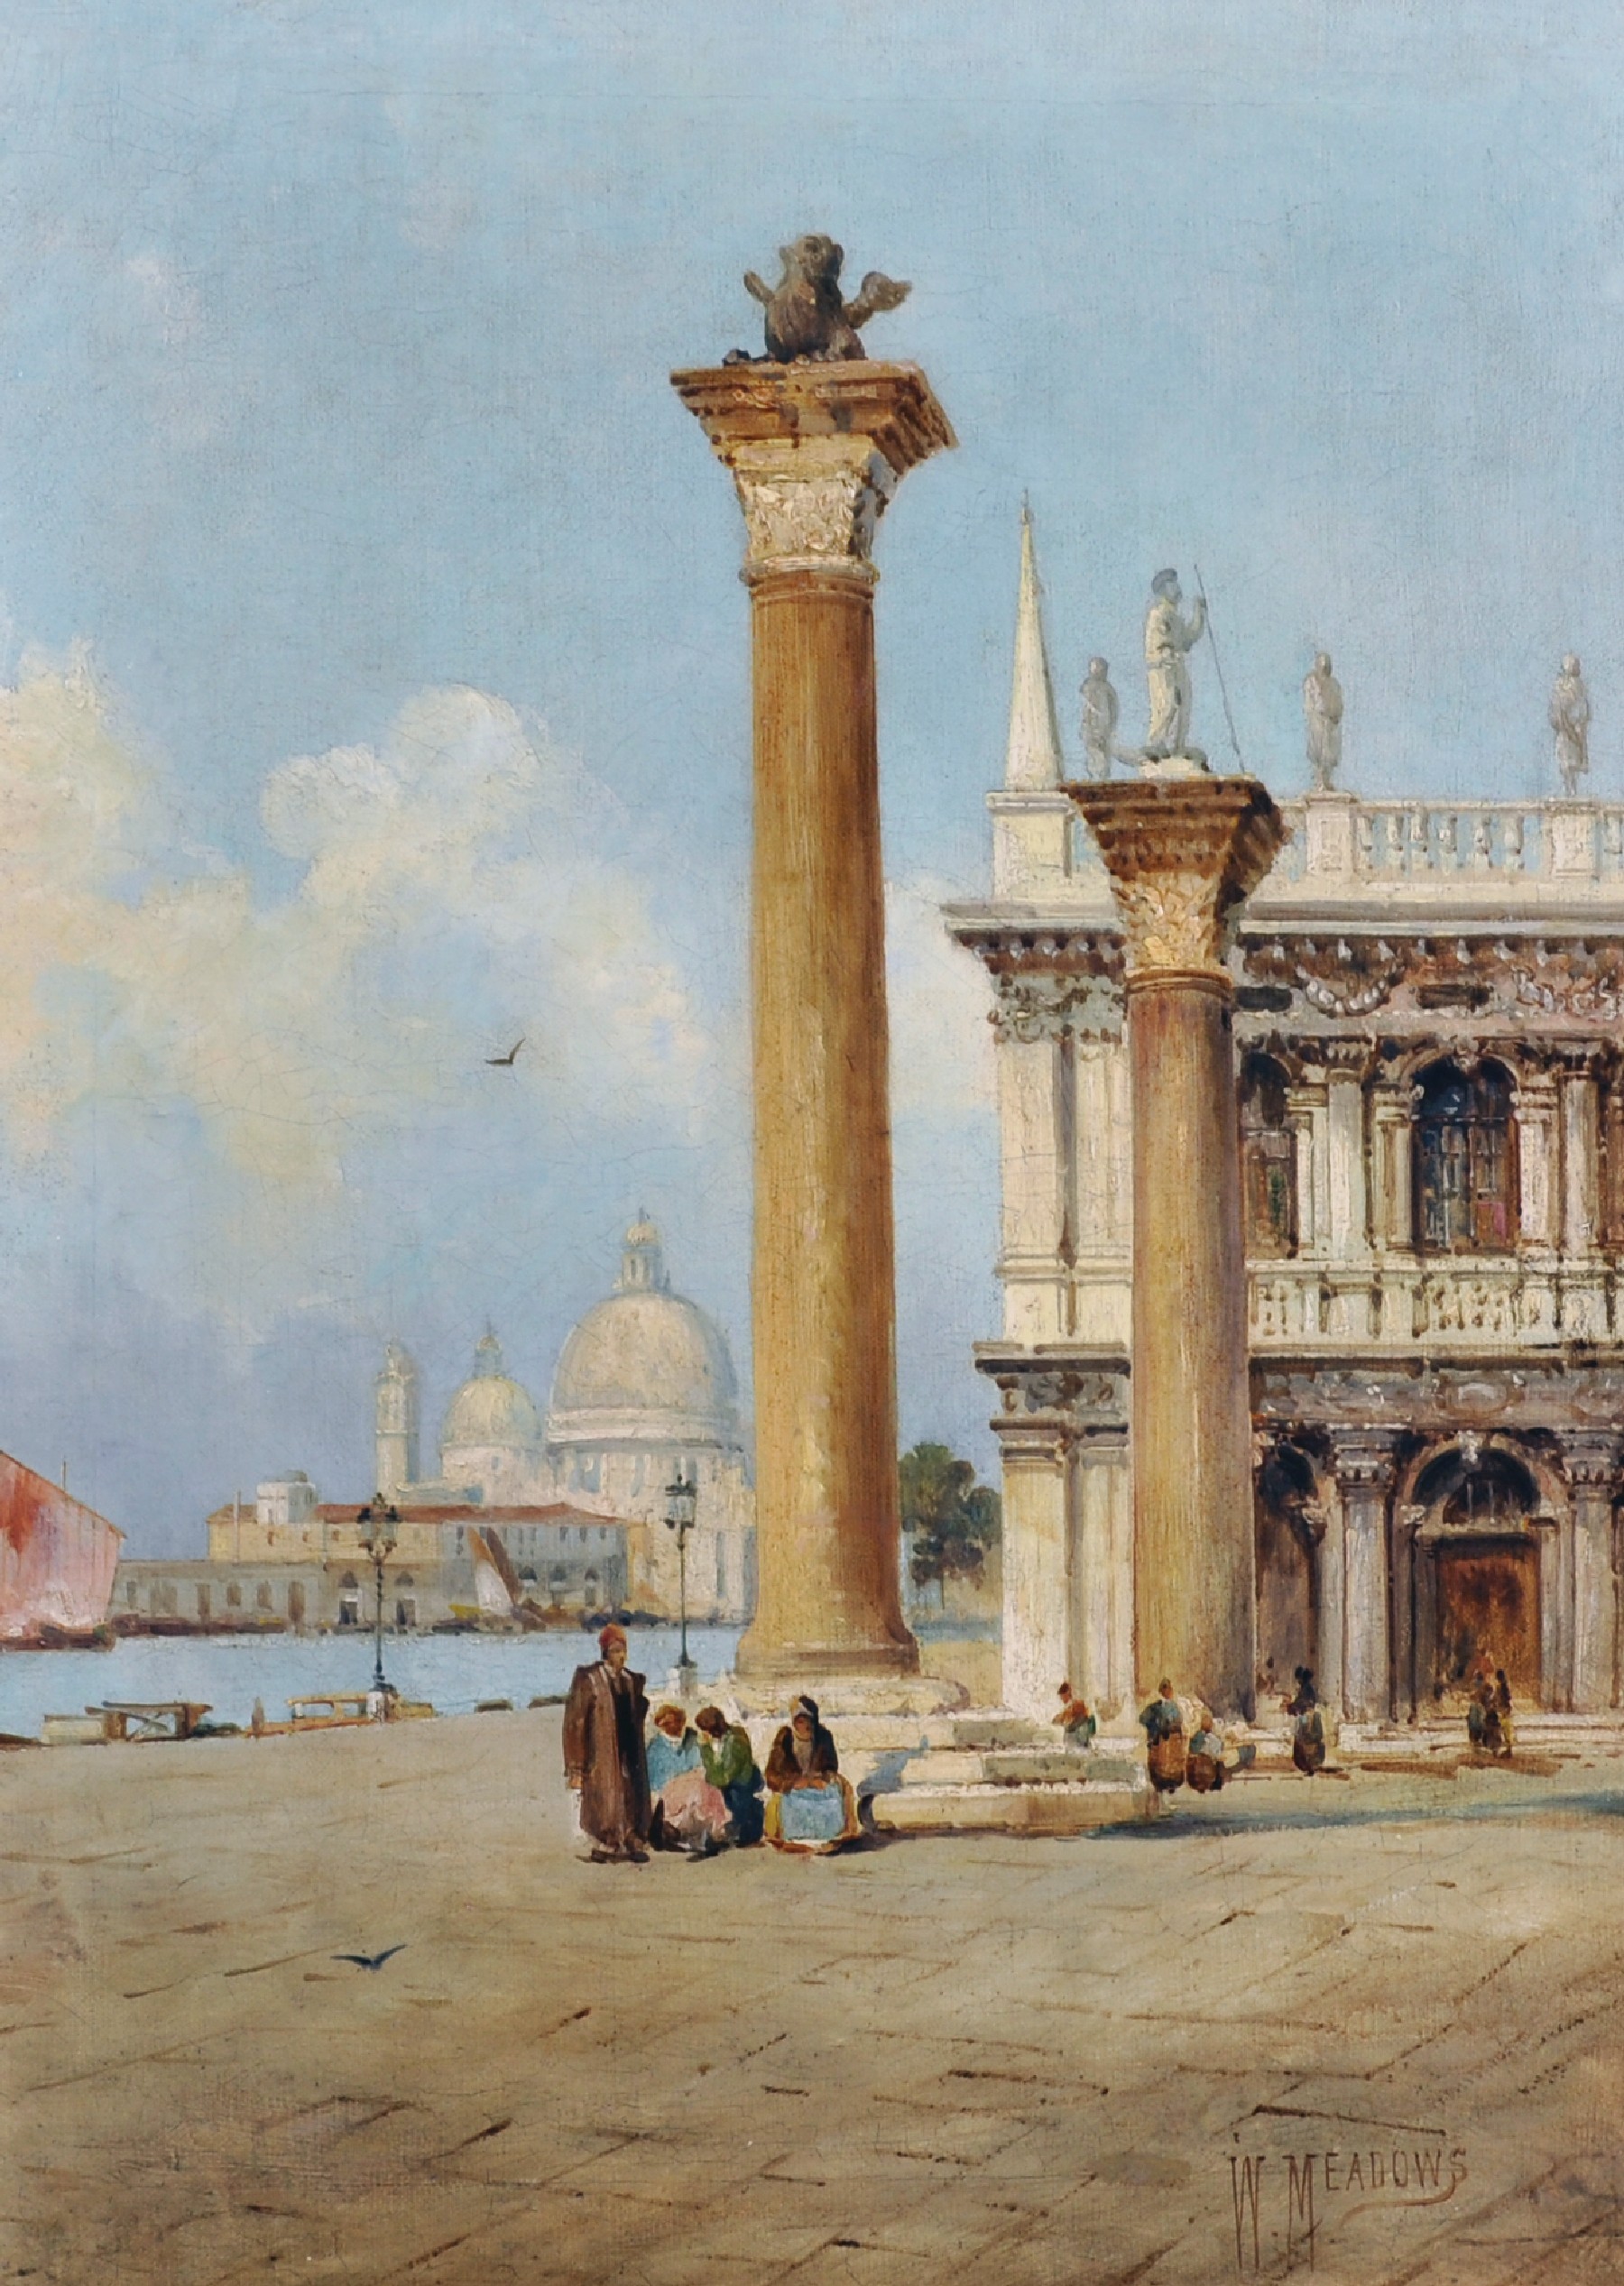 William George Meadows (act. 1825-c. 1901) British. 'Piazzo San Marco, Venice', with Figures resting